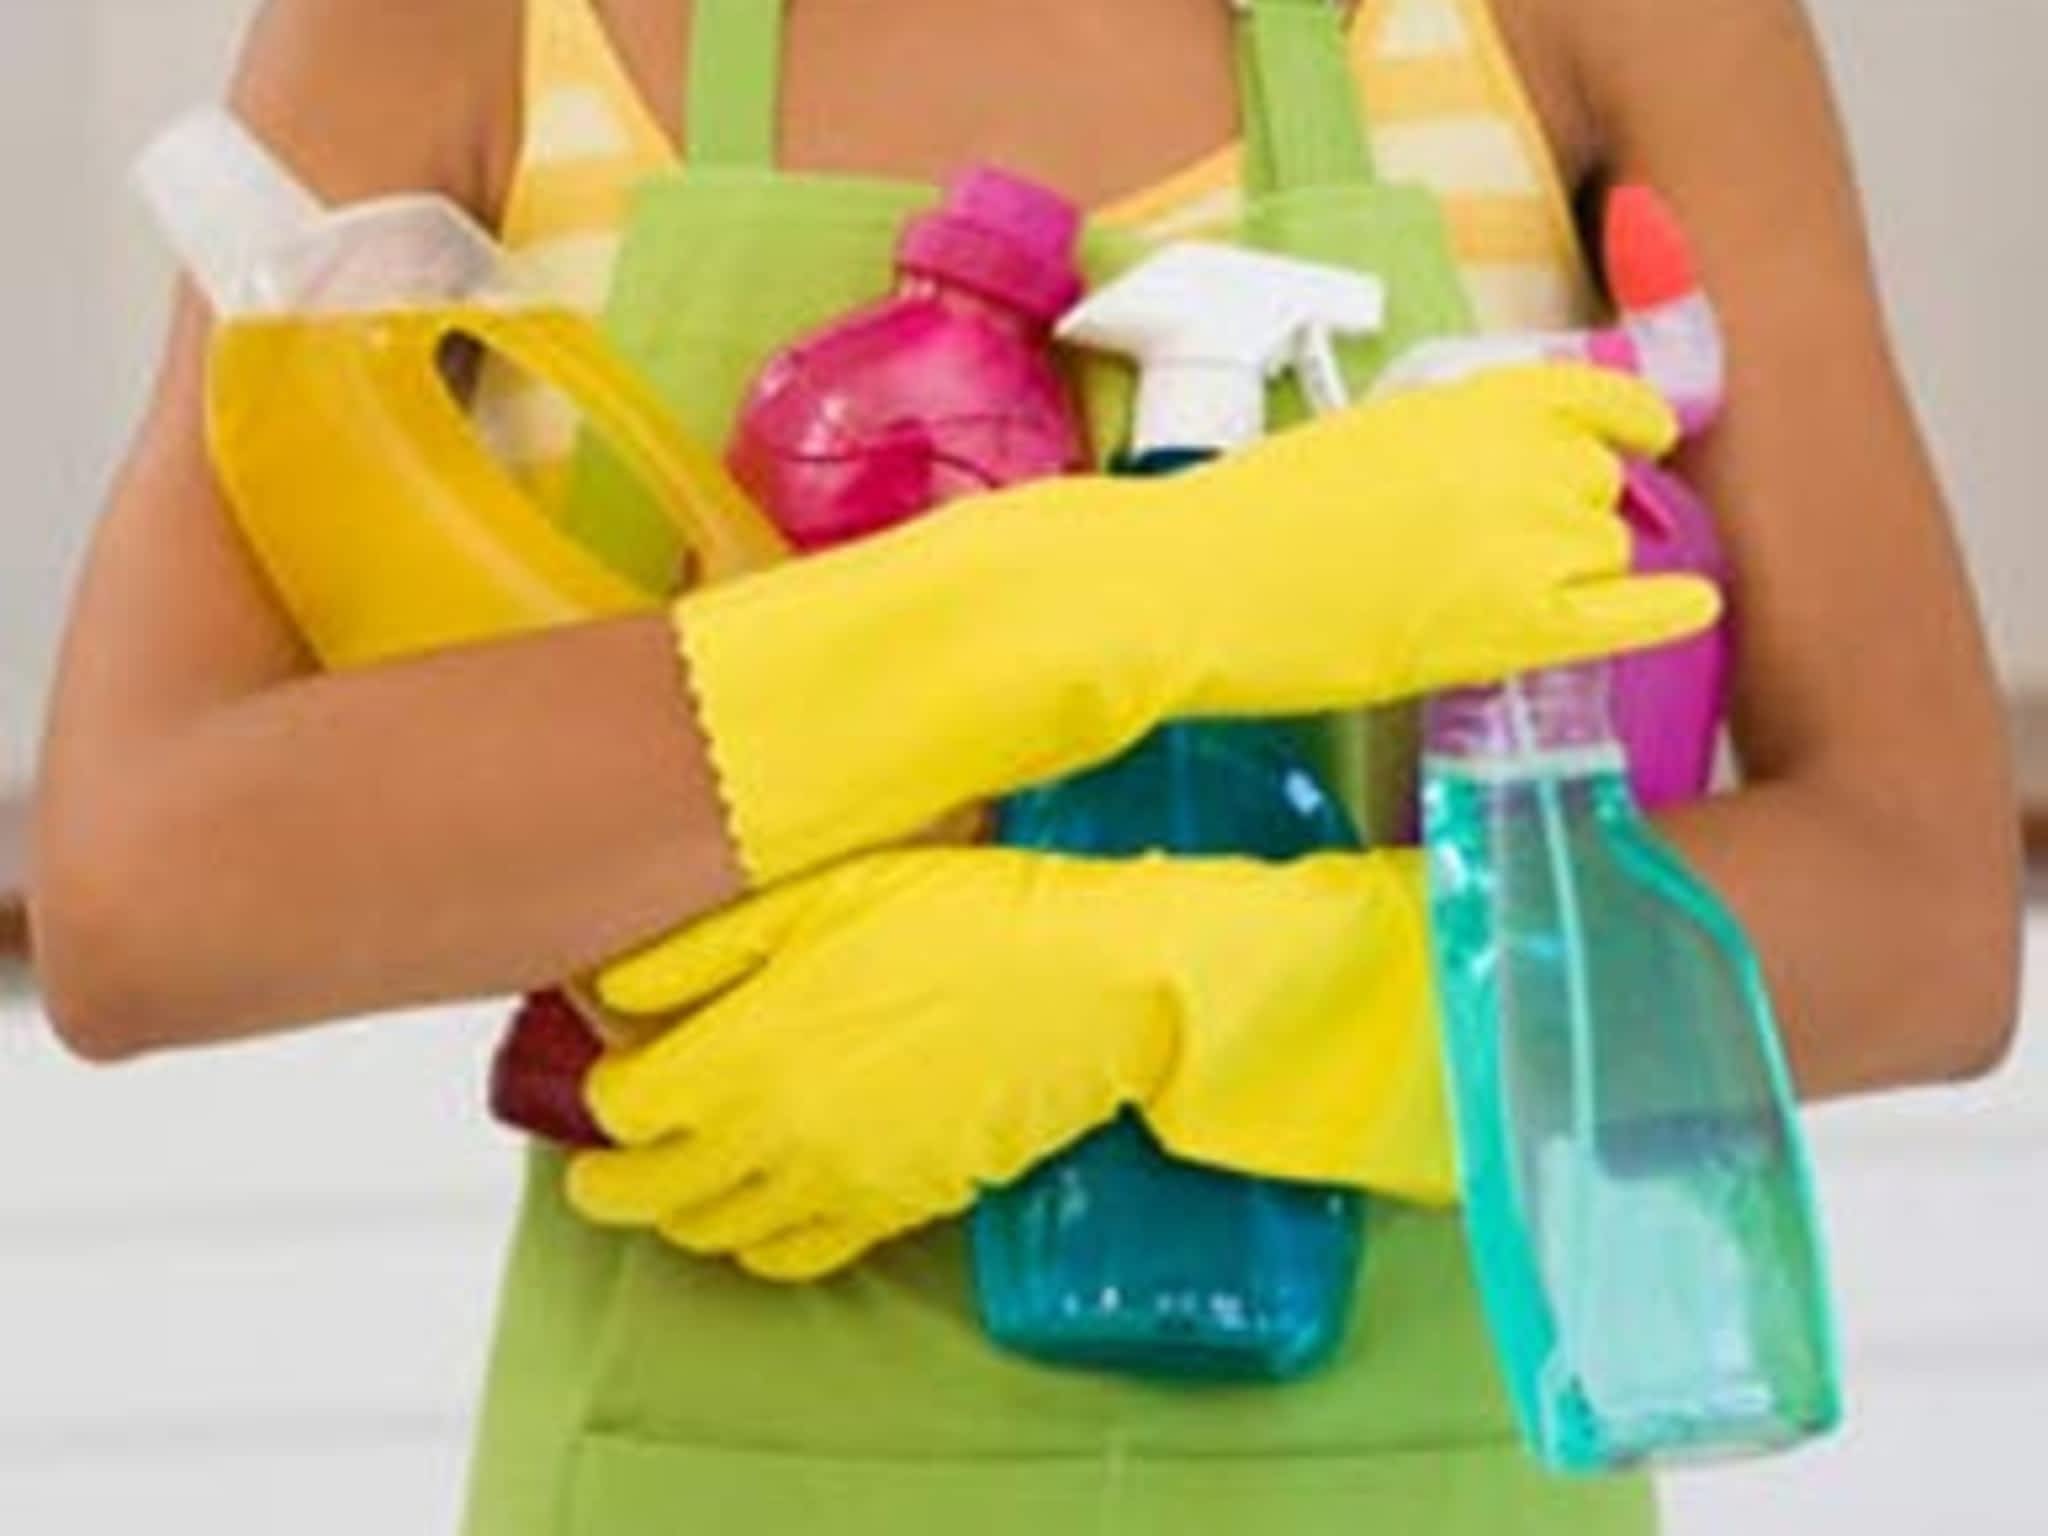 photo Five Stars Cleaning Service